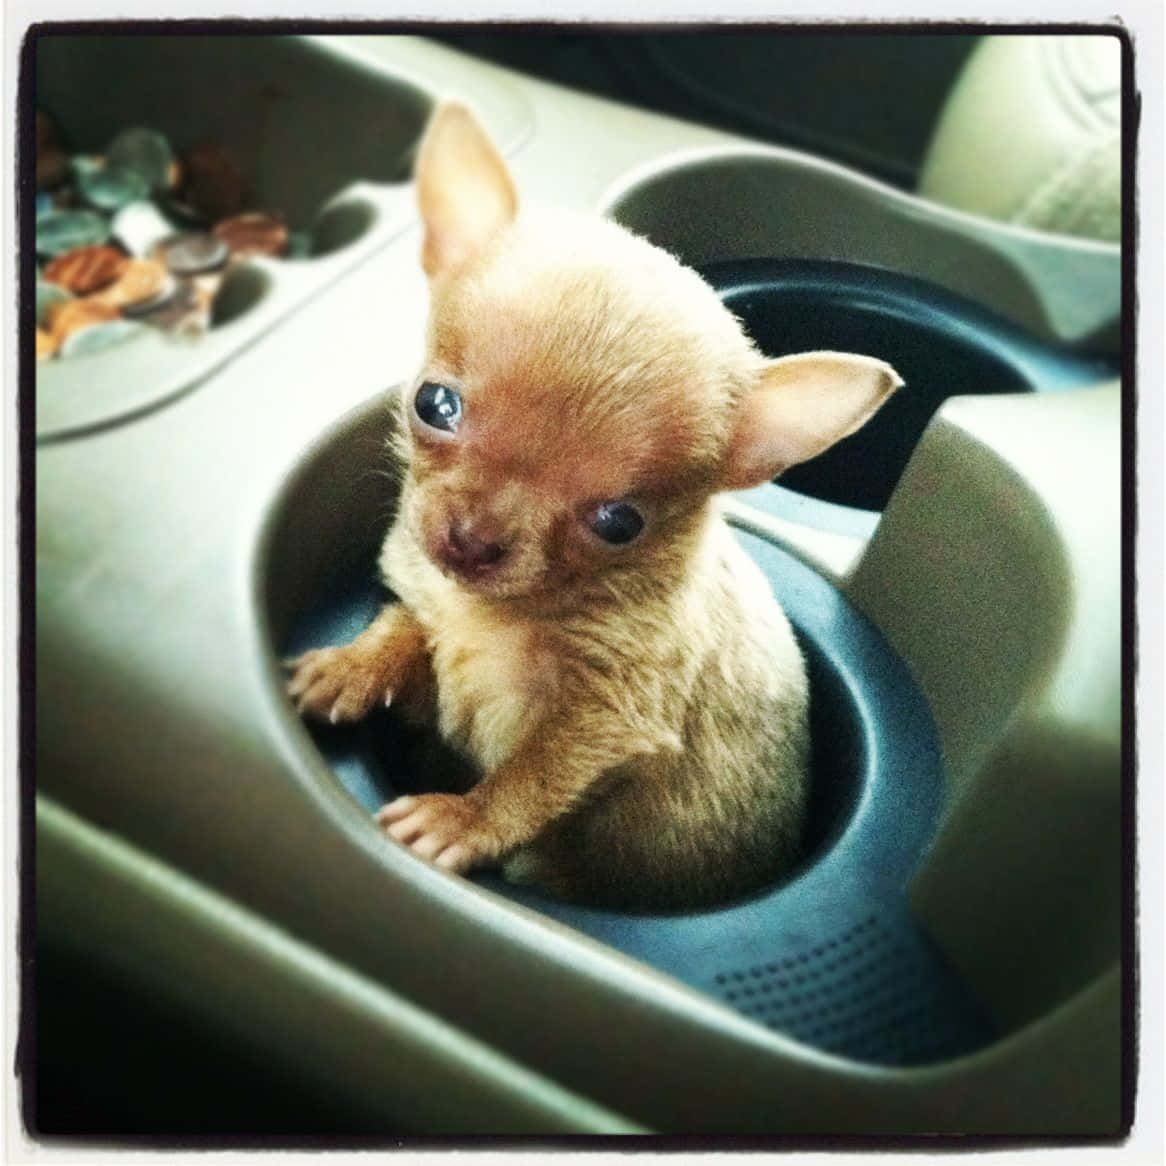 An adorable Teacup Chihuahua puppy lounging contentedly in a basket of toys.